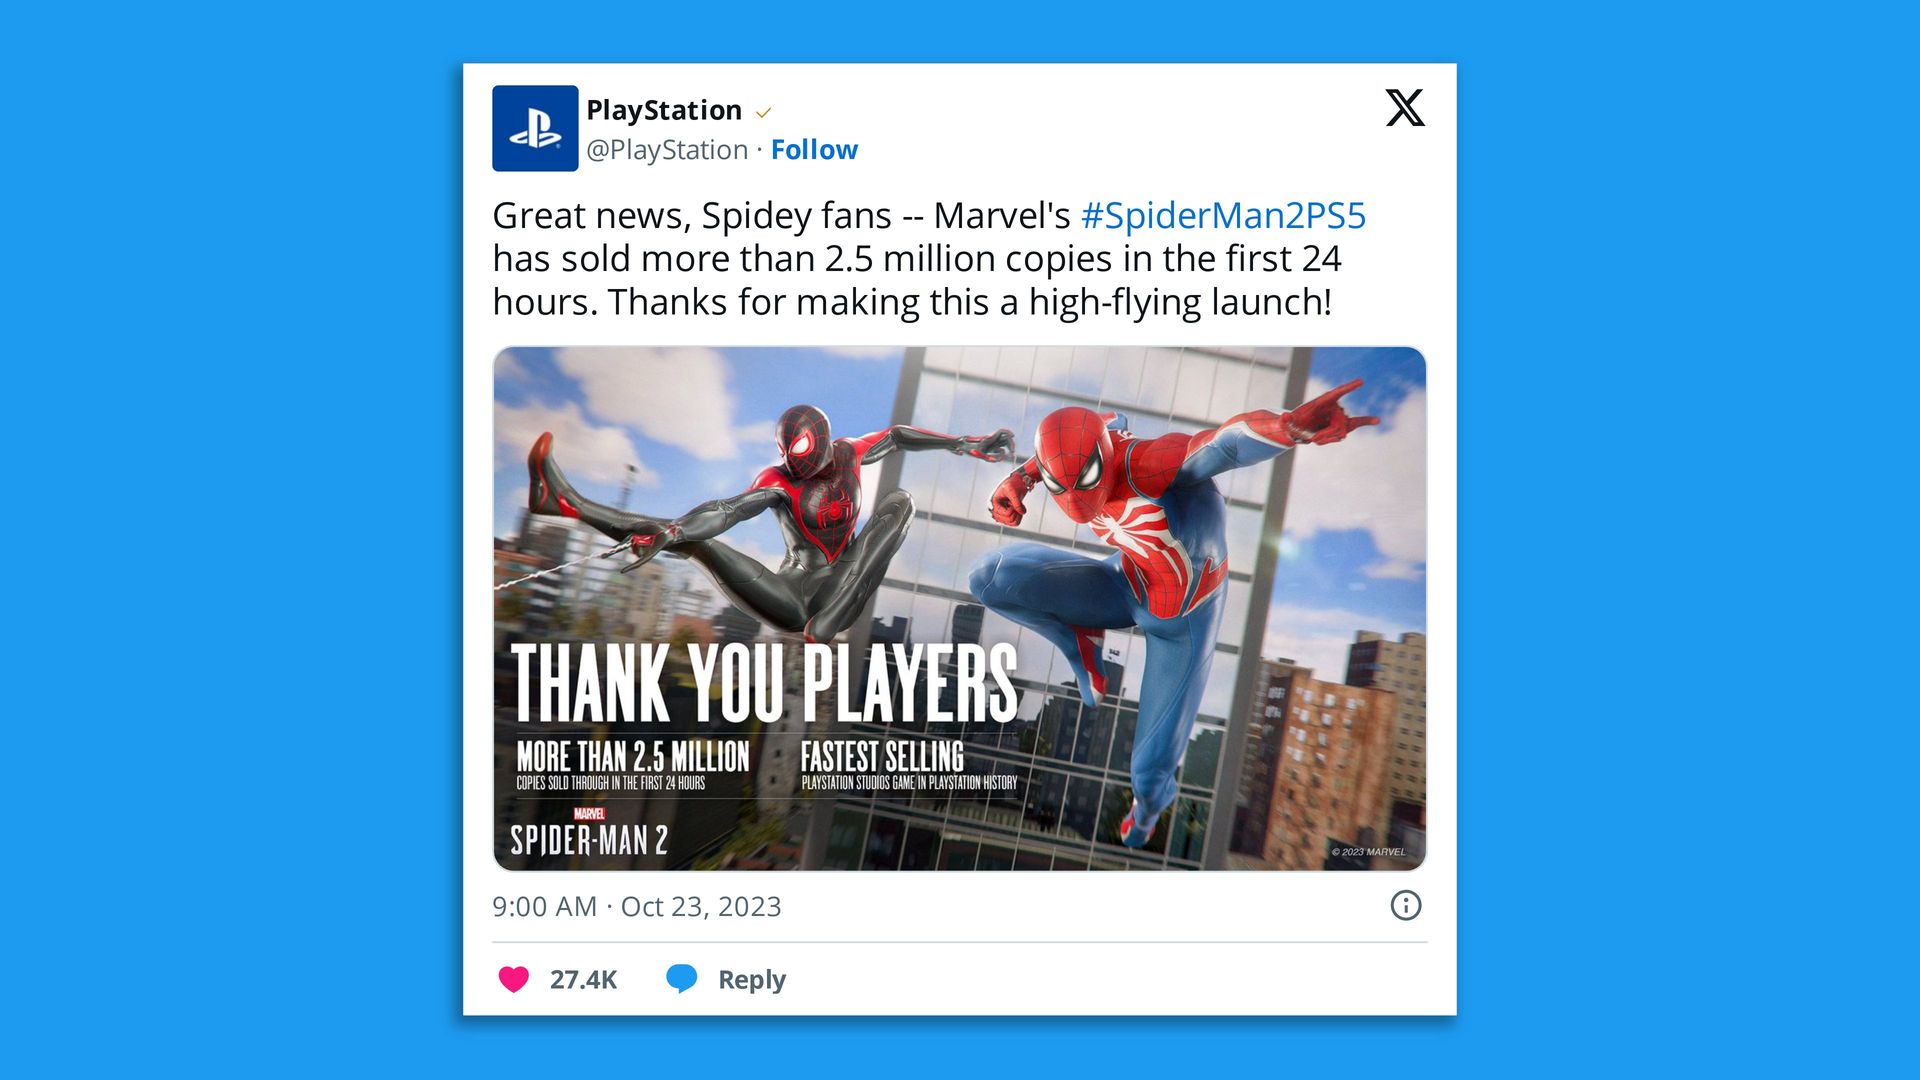 Screenshot of a tweet showing PlayStation announce Spider-Man 2 as its fastest-selling internally developed game